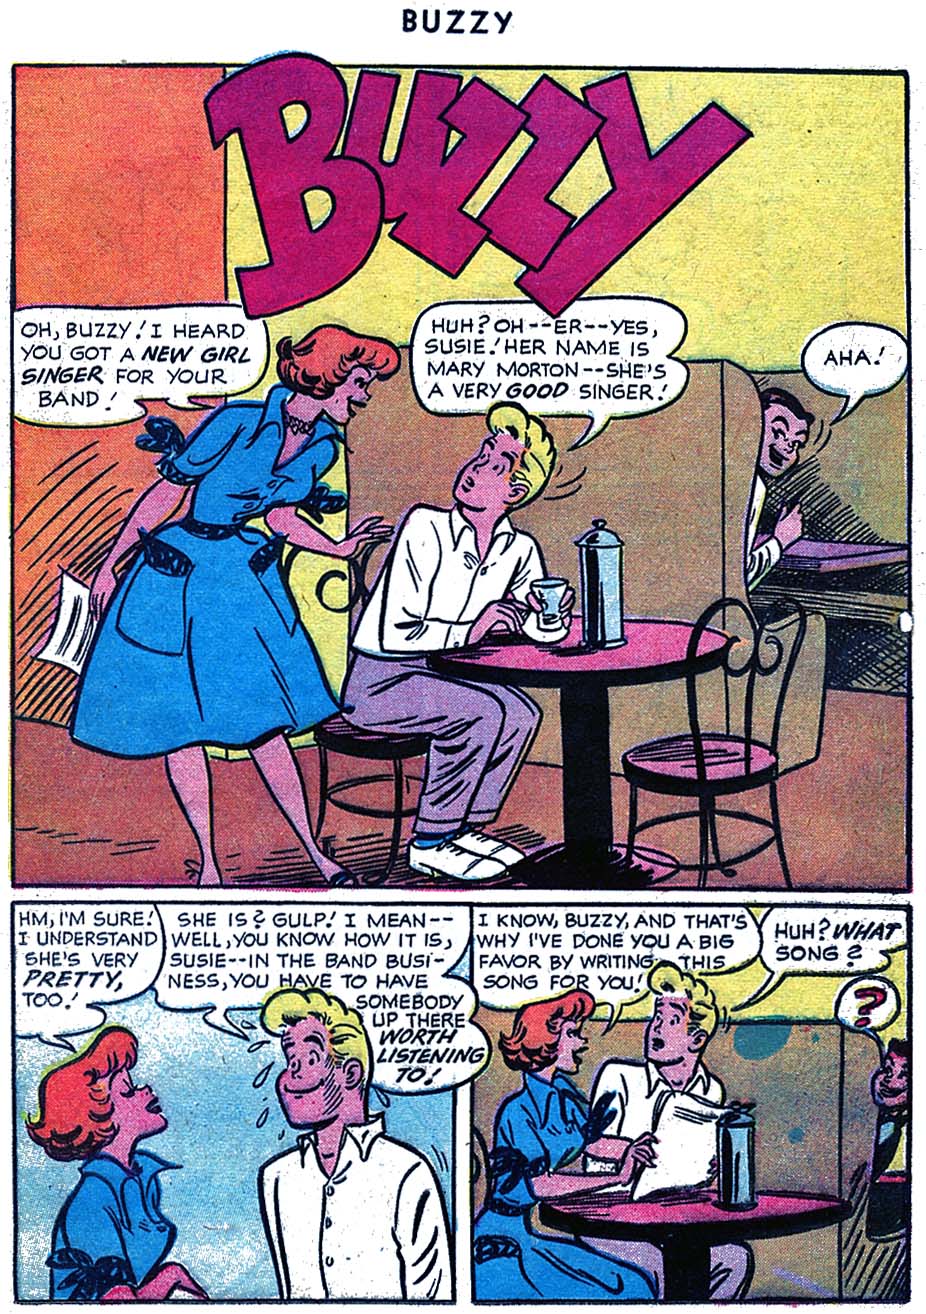 Read online Buzzy comic -  Issue #76 - 21